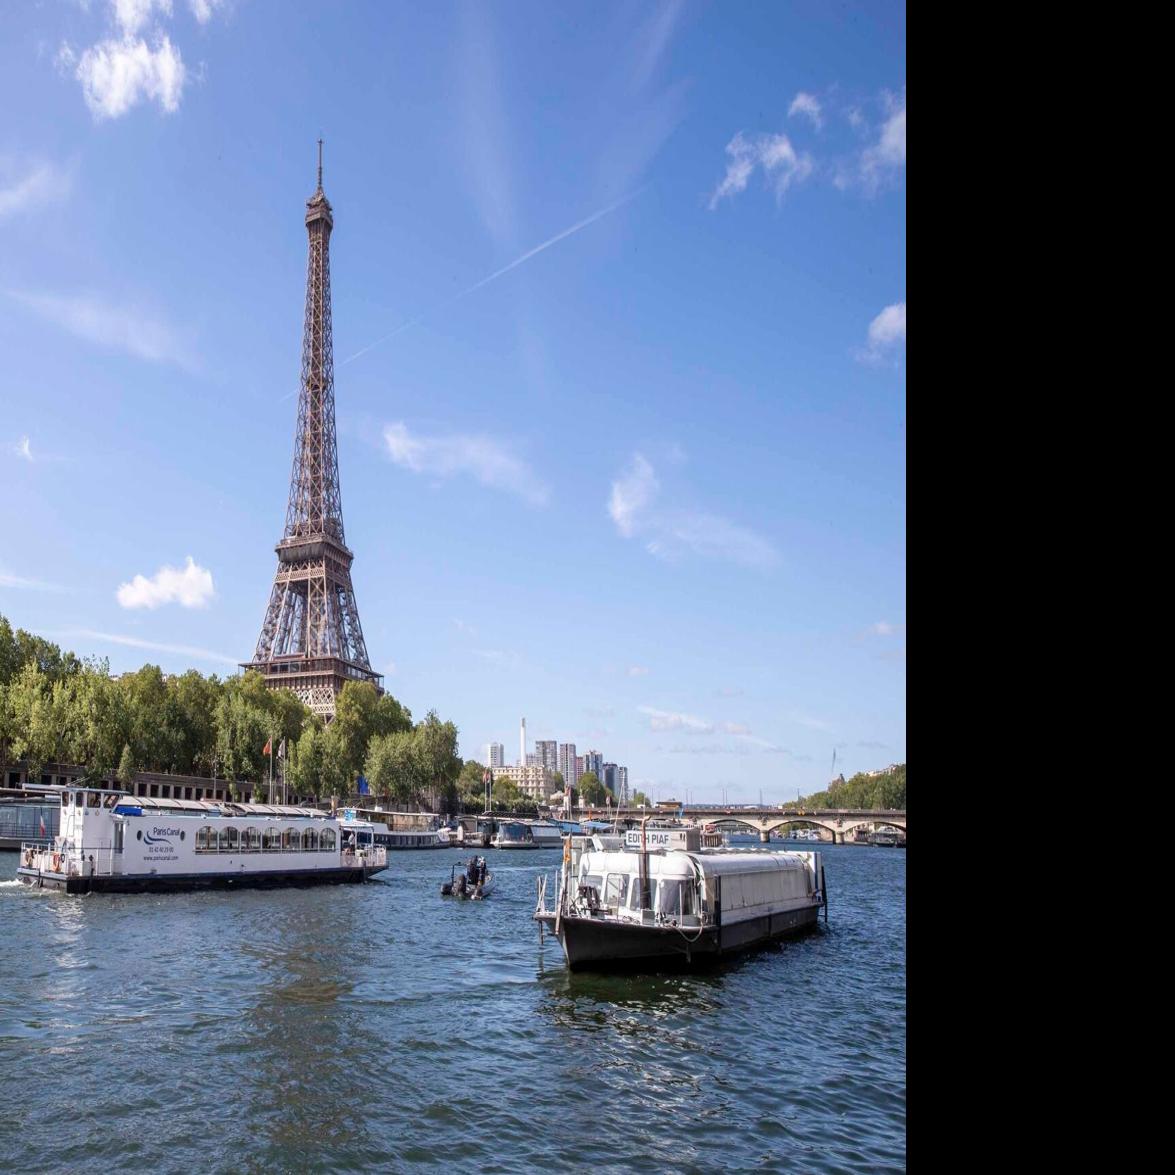 Eiffel Tower reopens; COVID passes required as of next week